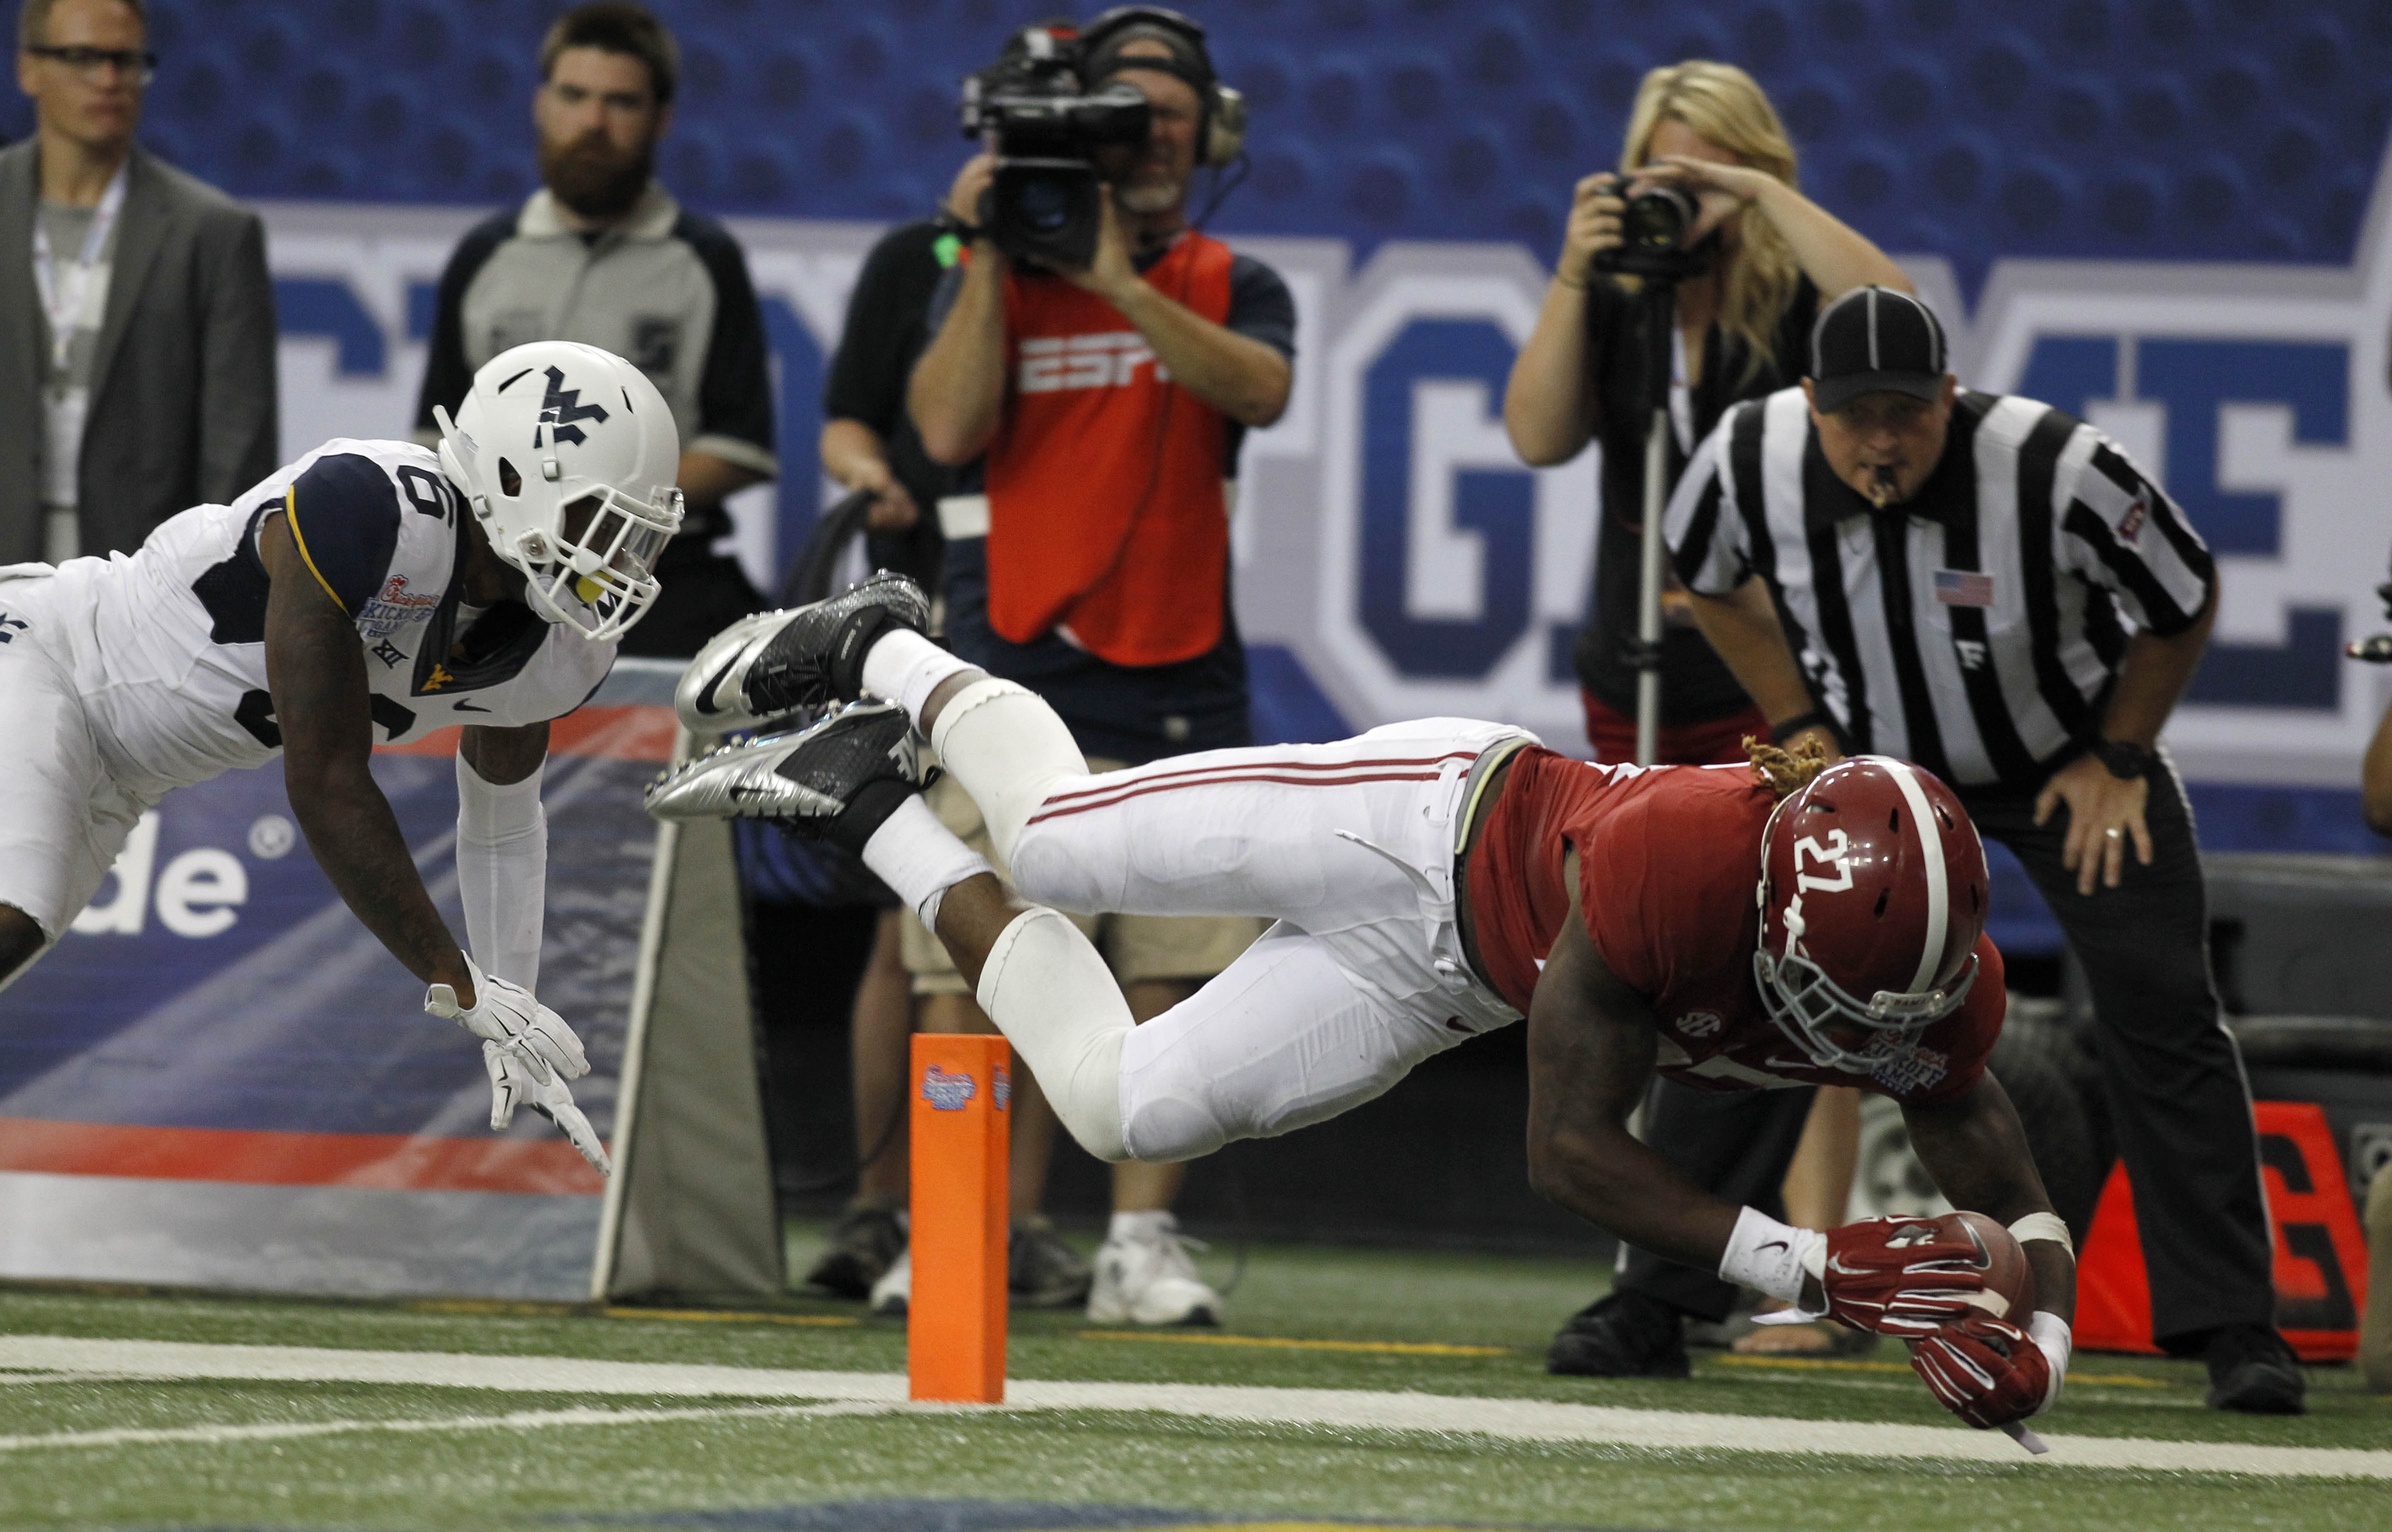 Aug 30, 2014; Atlanta, GA, USA; Alabama Crimson Tide running back Derrick Henry (27) dives in to the end zone to score a touchdown against West Virginia Mountaineers safety Dravon Henry (6) in the third quarter of the 2014 Chick-fil-A Kickoff Game at the Georgia Dome. Mandatory Credit: Brett Davis-USA TODAY Sports